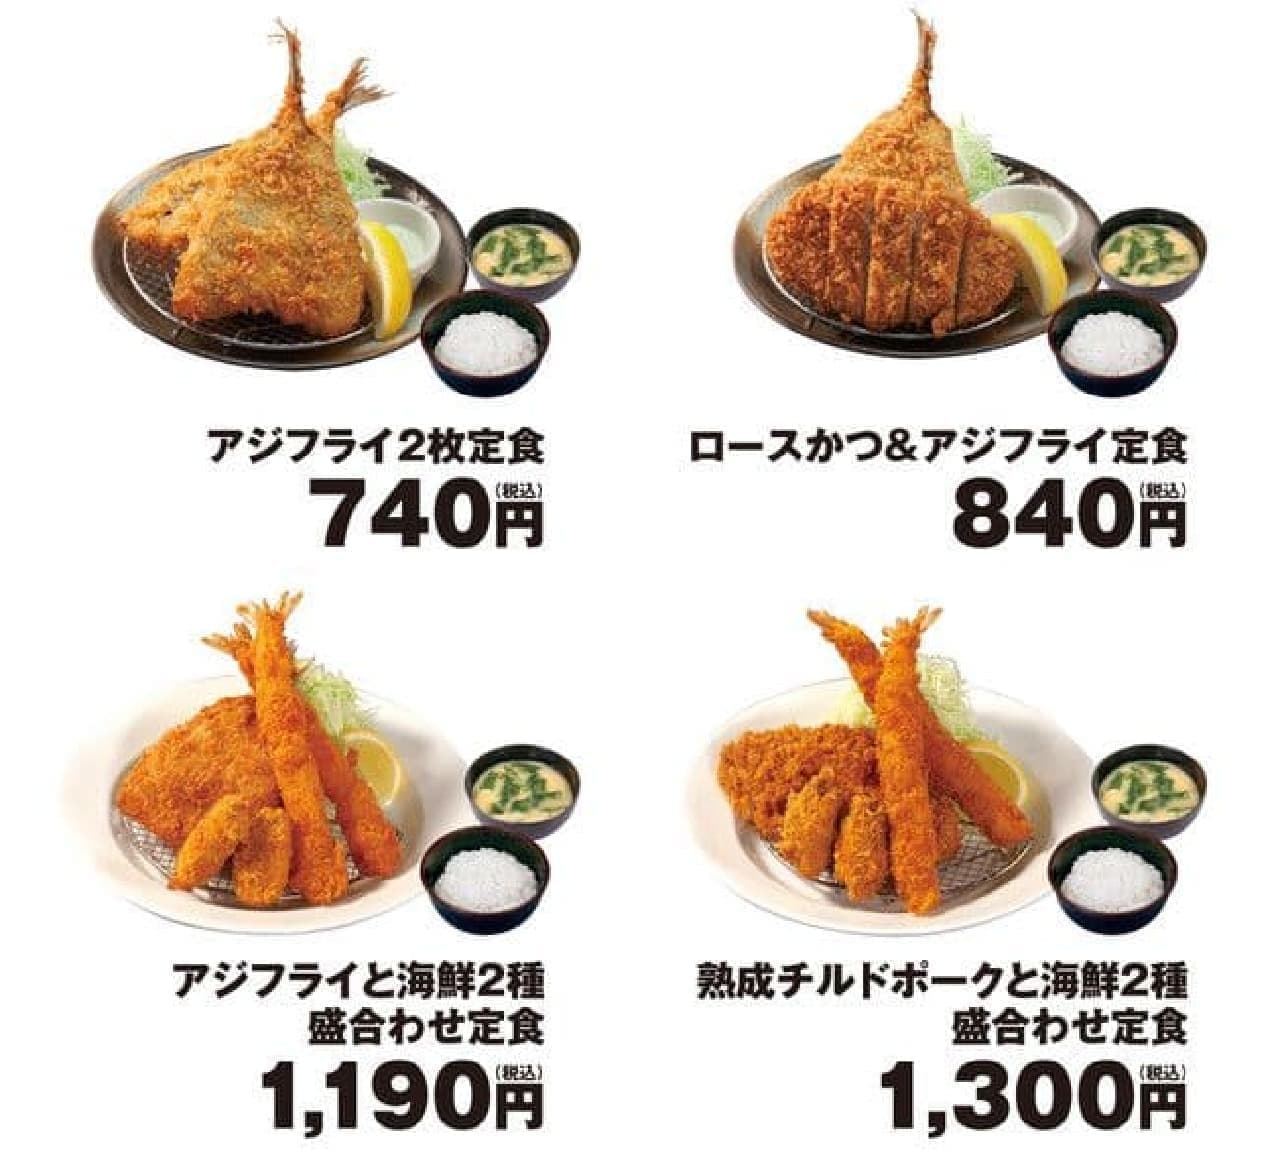 Matsunoya "Rose and Aji Fry Set Meal" "Aji Fry and 2 Seafood Assorted Set Meals" "Aged Chilled Pork and 2 Seafood Assorted Set Meals"